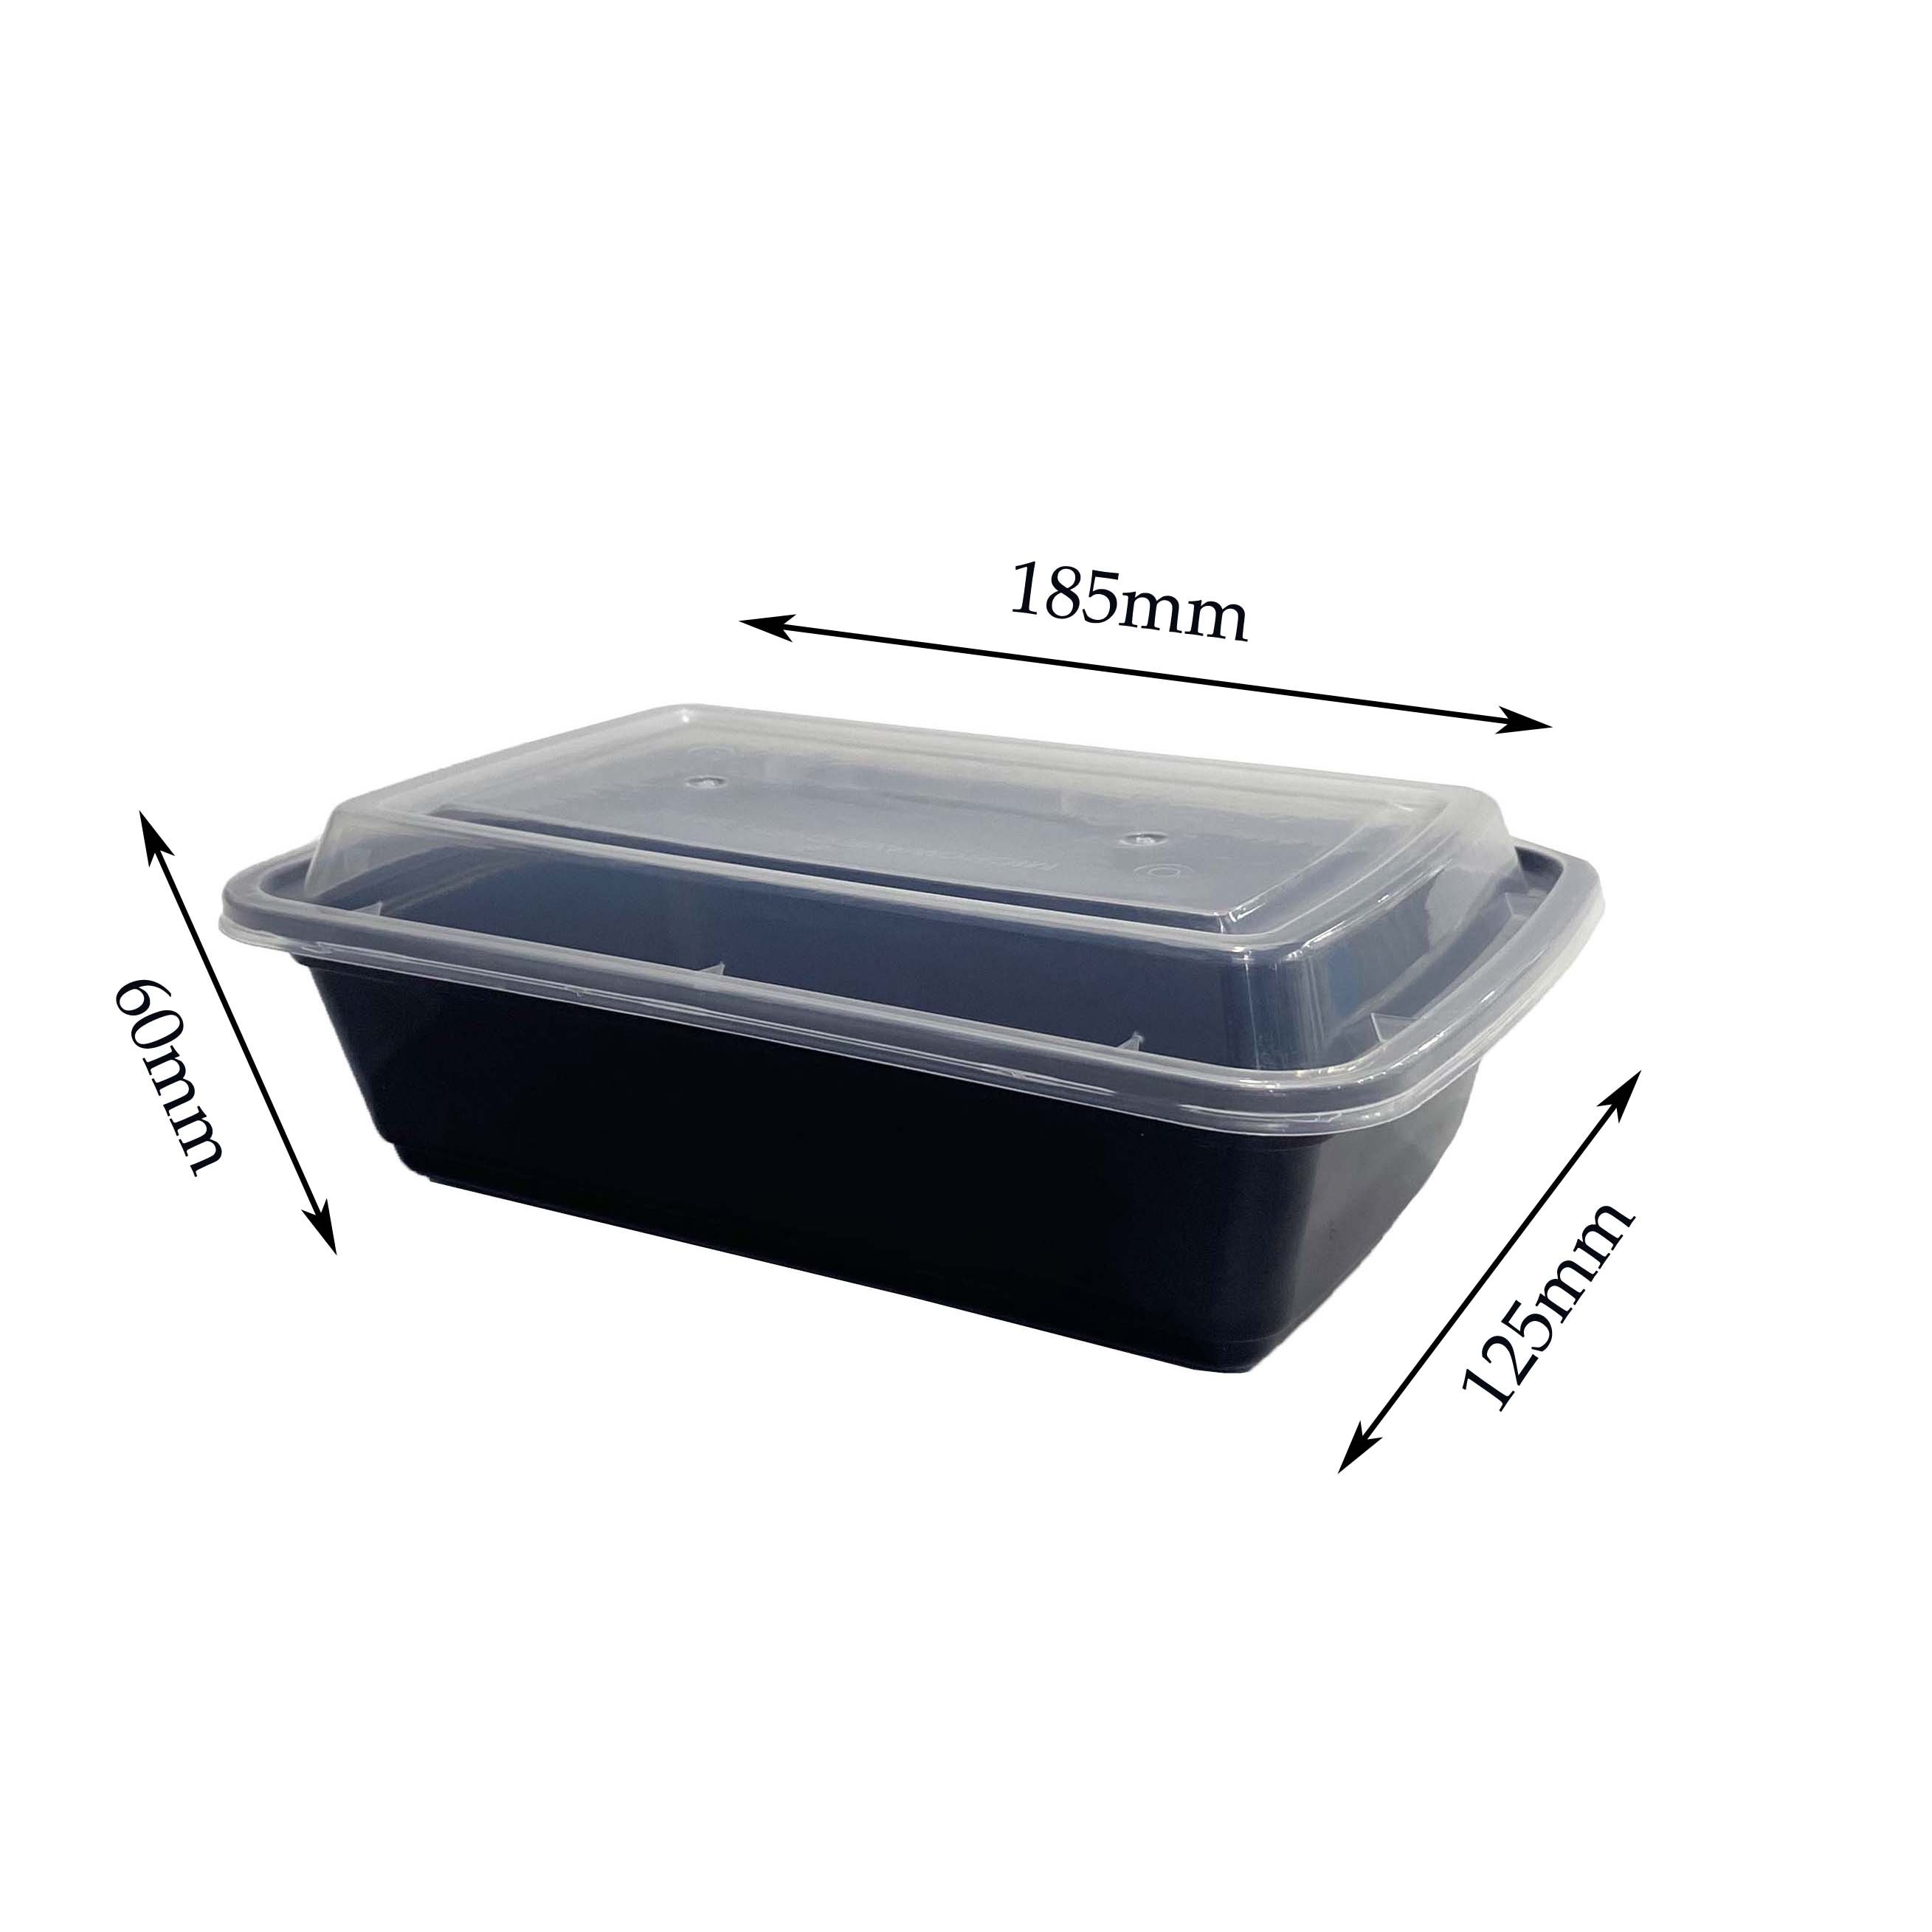 24oz Disposable Plastic Takeaway Food Container, Microwave Square Food Lunch Box With Lid